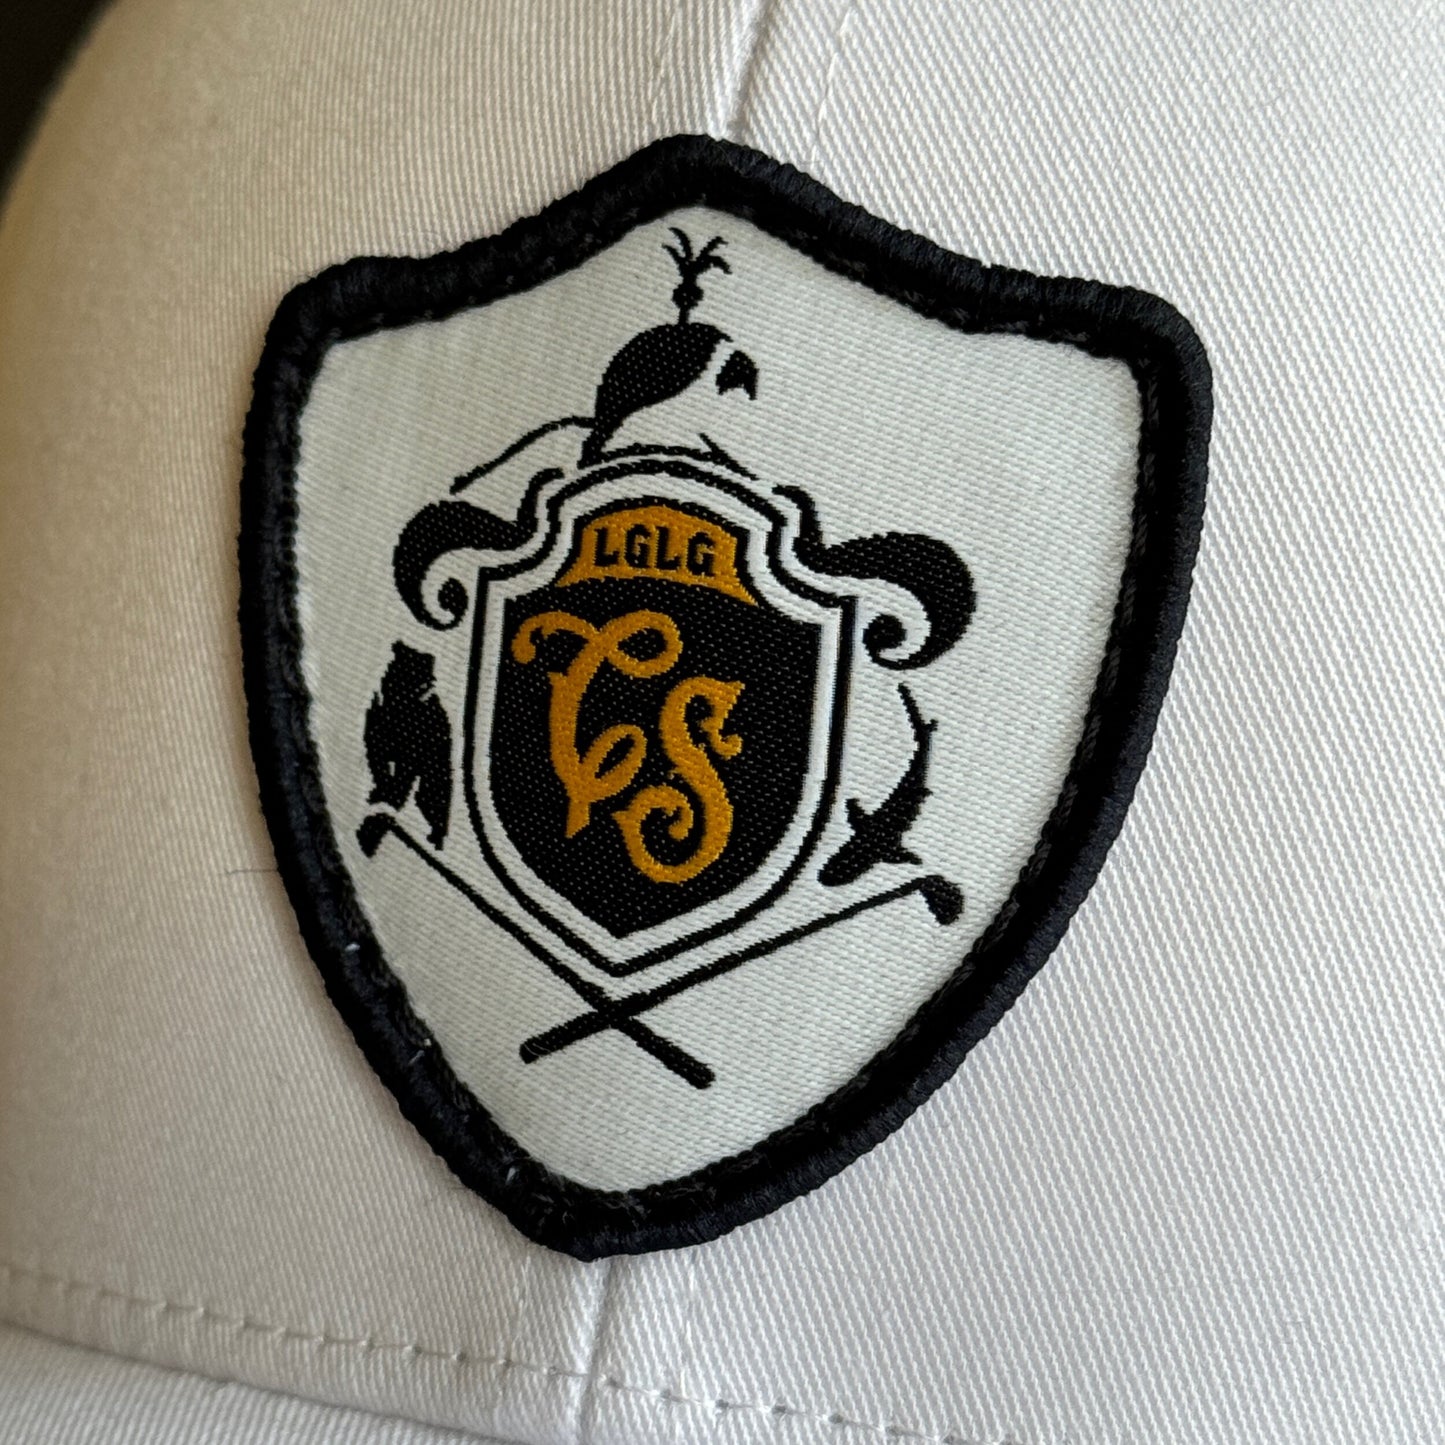 The Family Crest Hat (White)